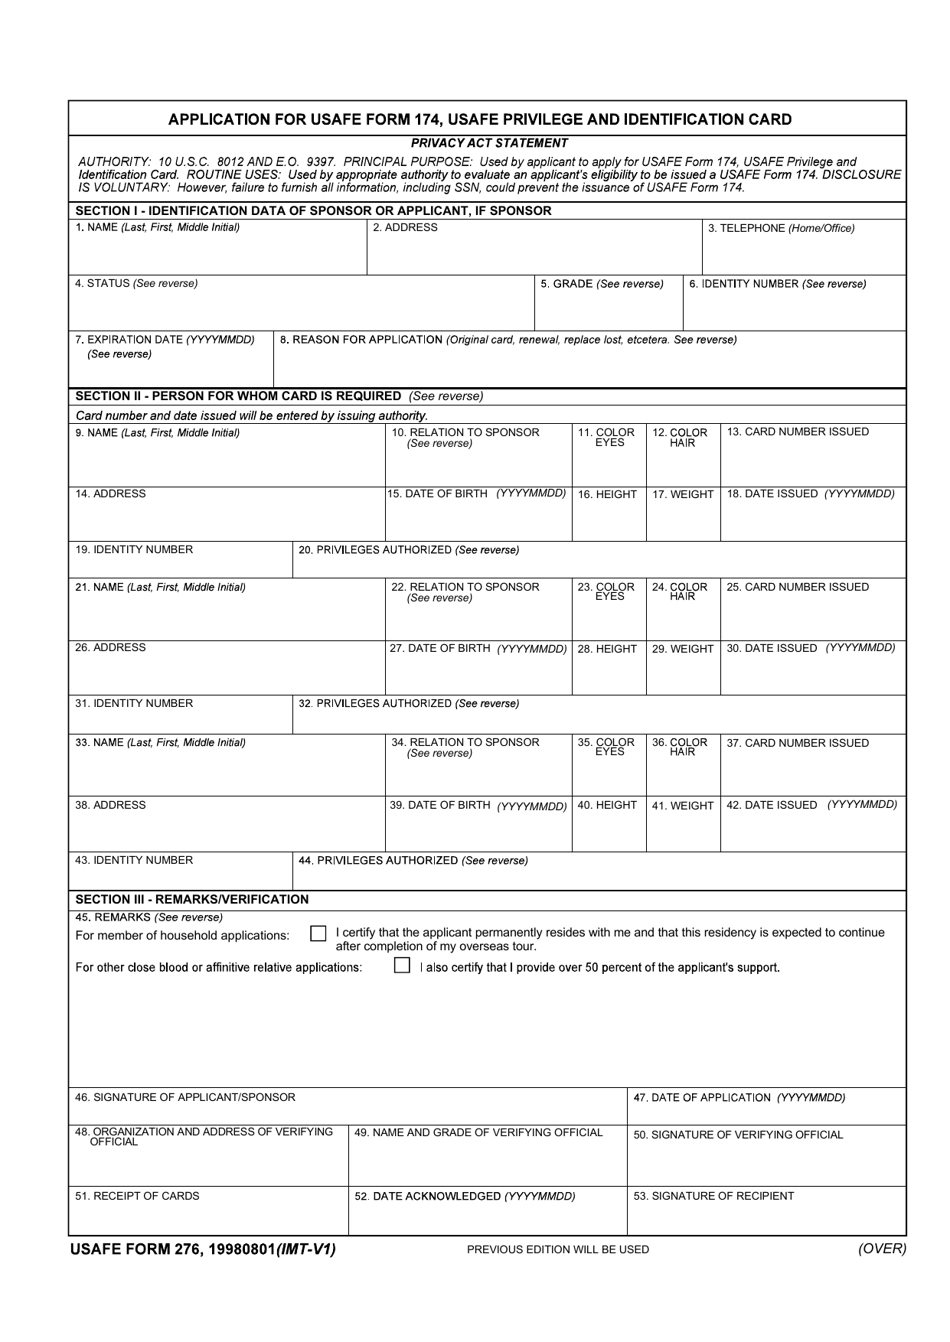 USAFE Form 276 Application for Usafe Form 174, Usafe Privilege and Identification Card, Page 1